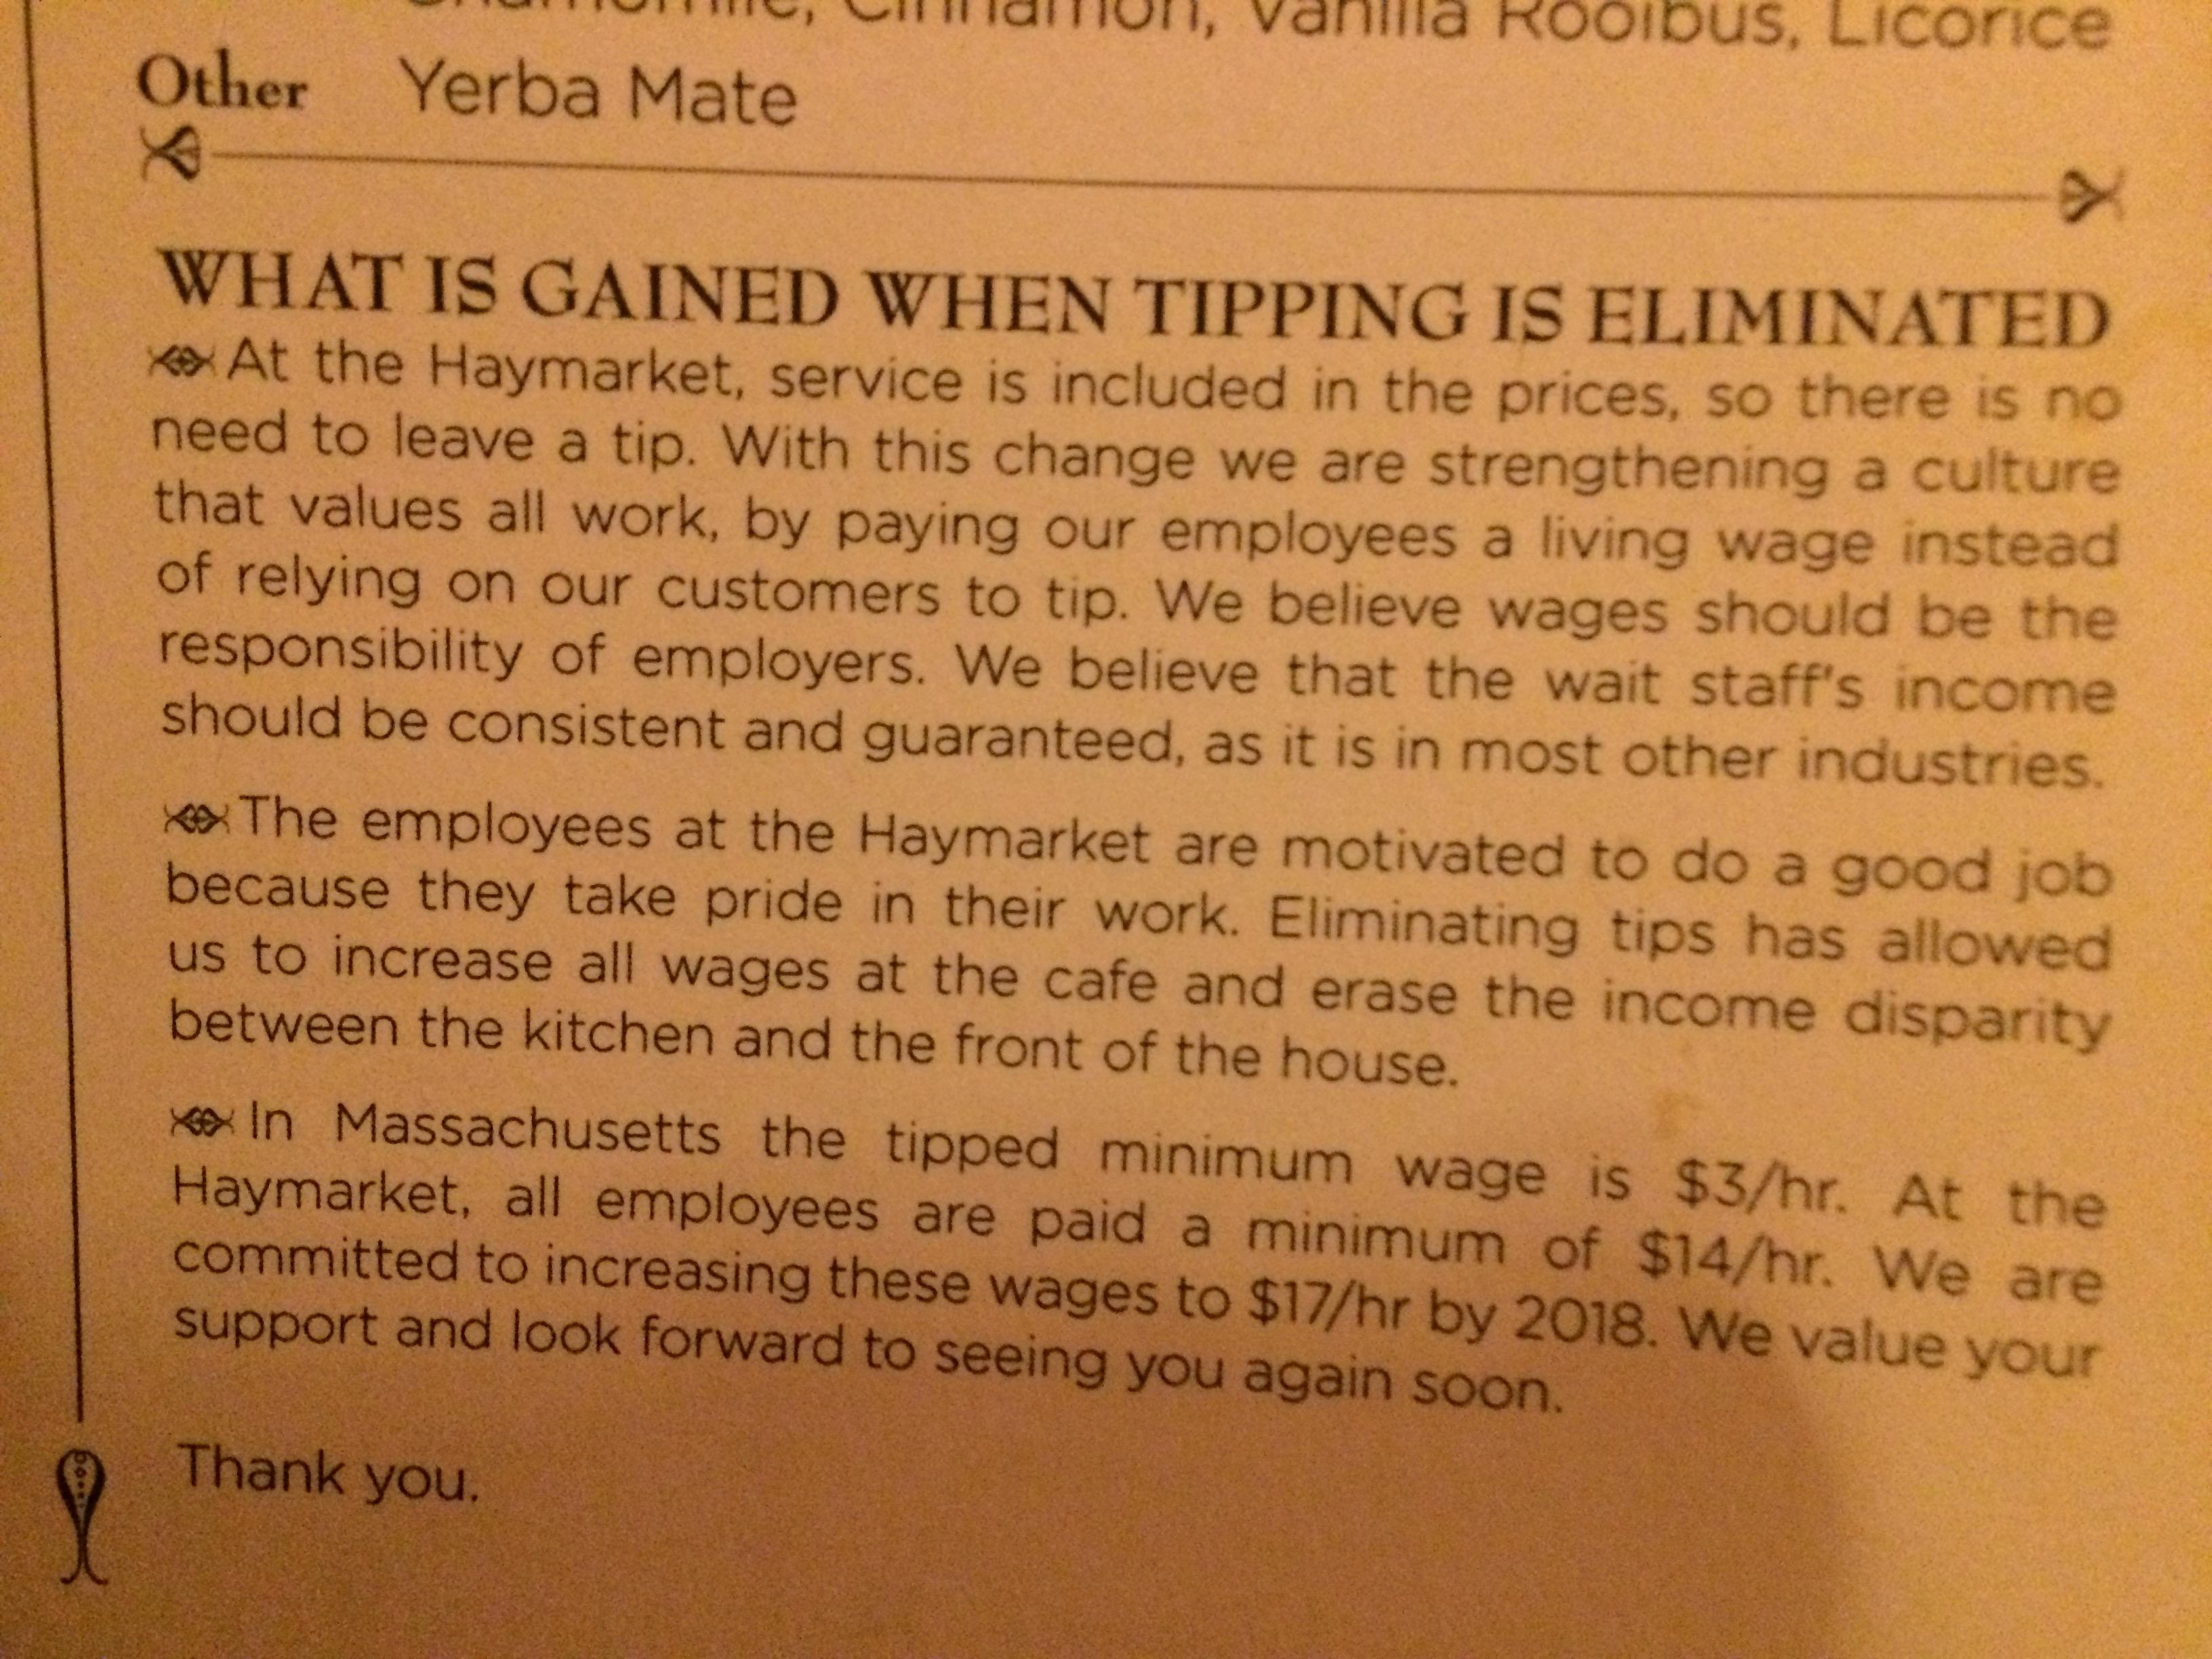 What is Gained When Tipping is Eliminated